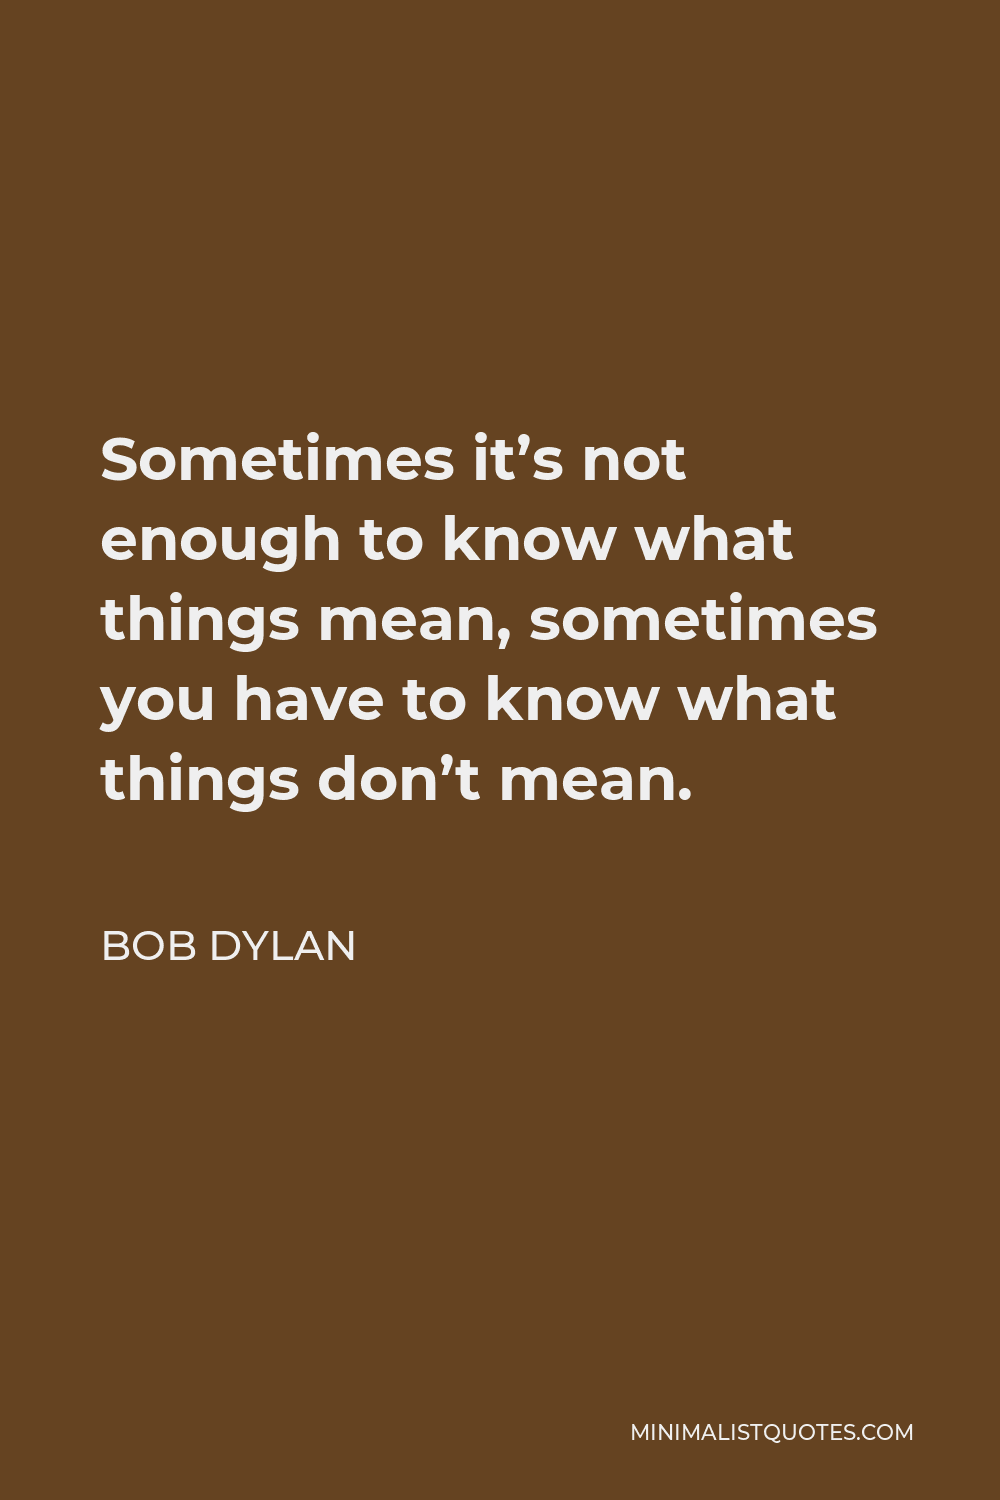 Bob Dylan Quote - Sometimes it’s not enough to know what things mean, sometimes you have to know what things don’t mean.